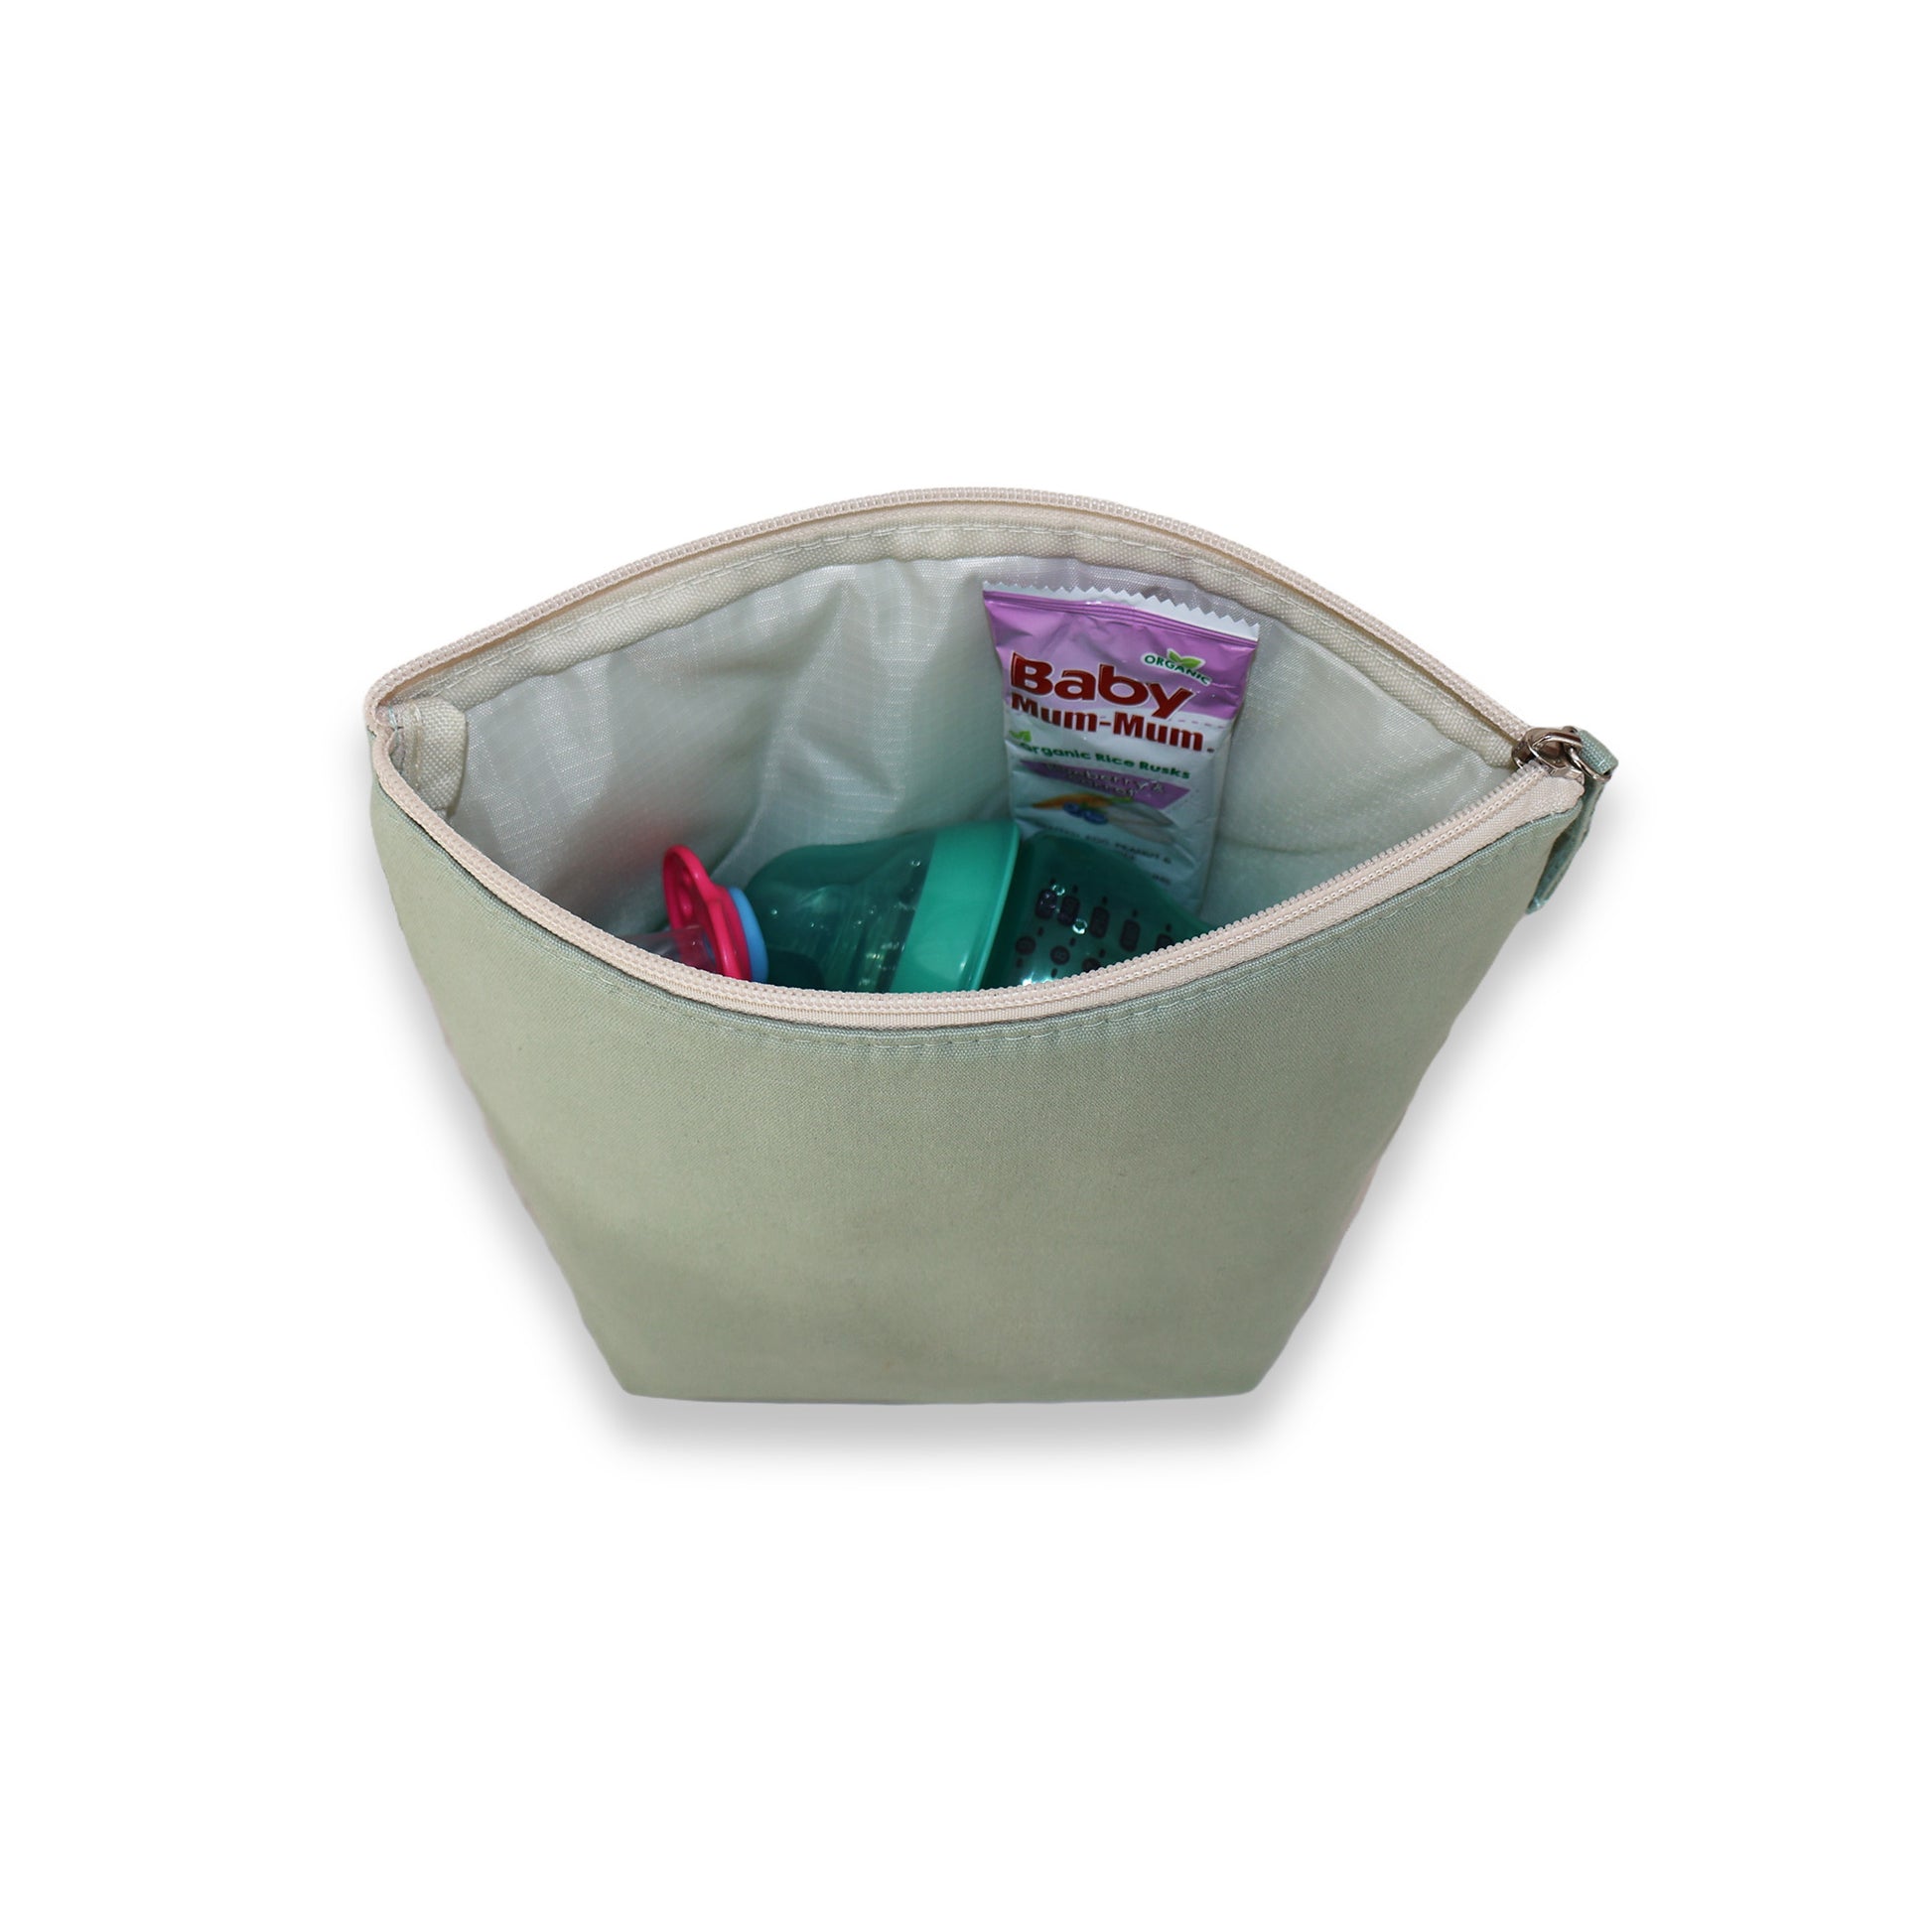 Small cooler bag for baby bottles, formula, snacks, medicines, lunch.  Perfect to stash in your handbag without looking like a kids lunchbox.